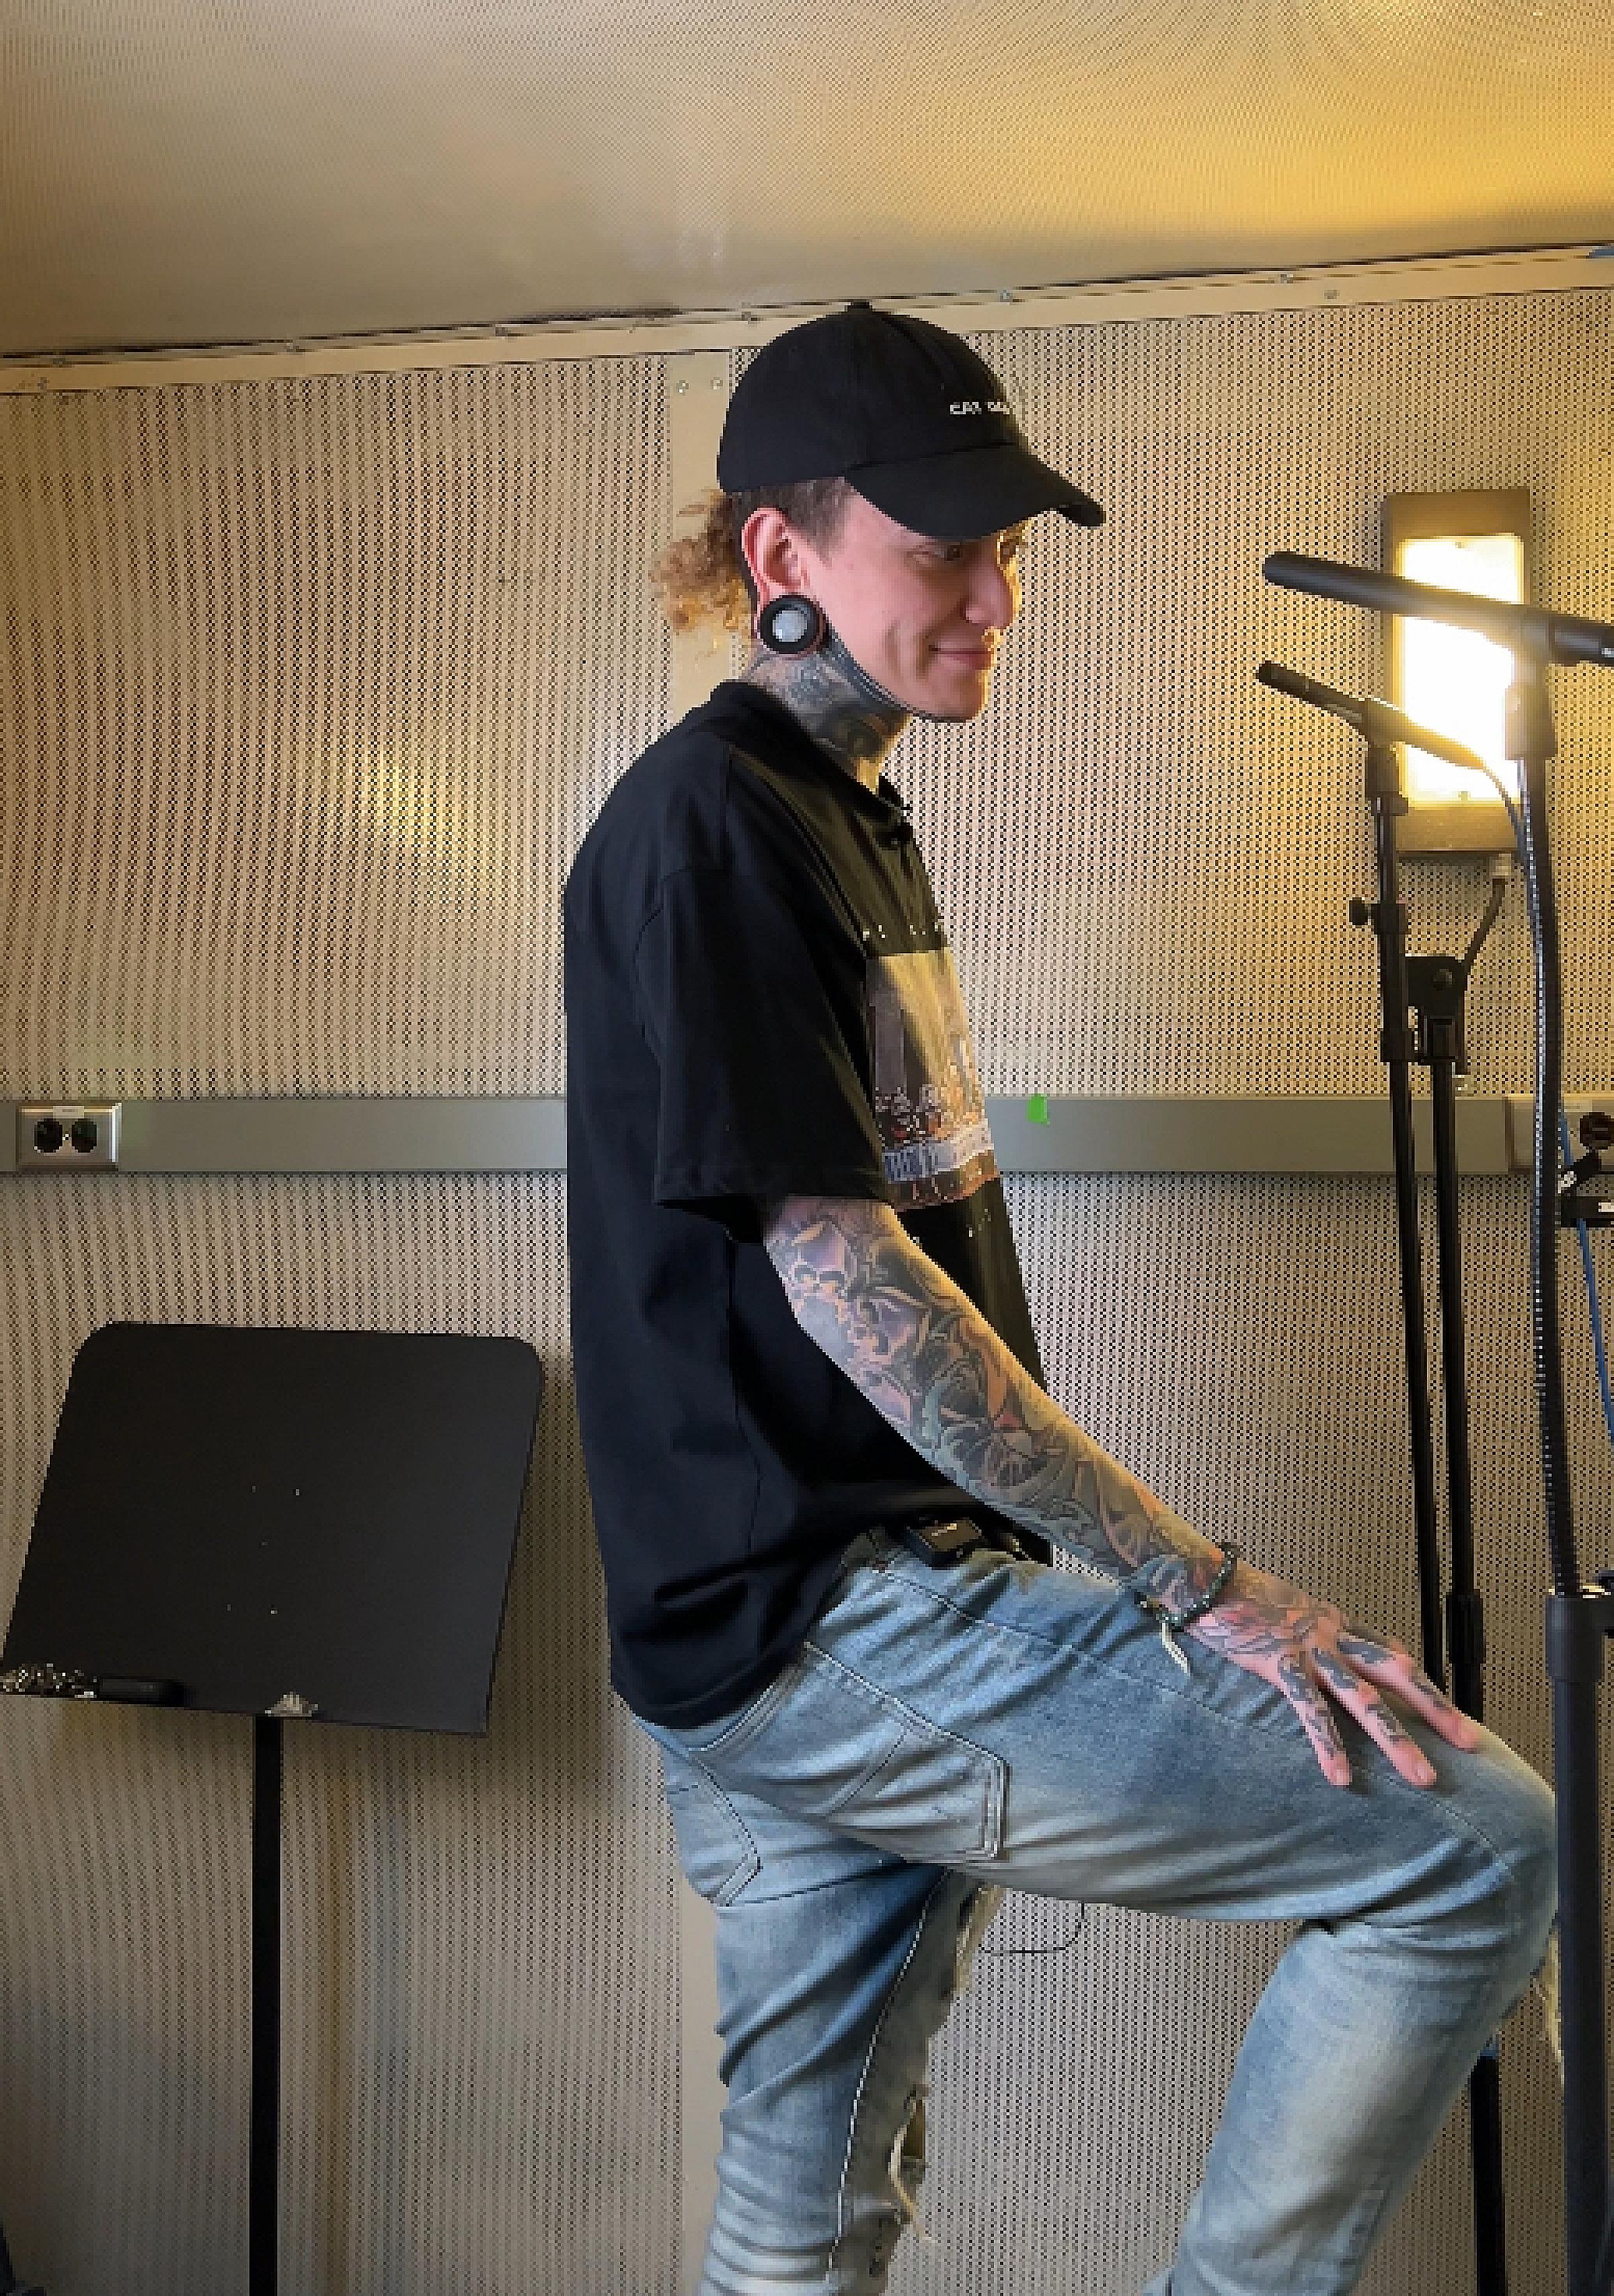 A person with full sleeve tattoos cups his ears as he sings in a recording booth